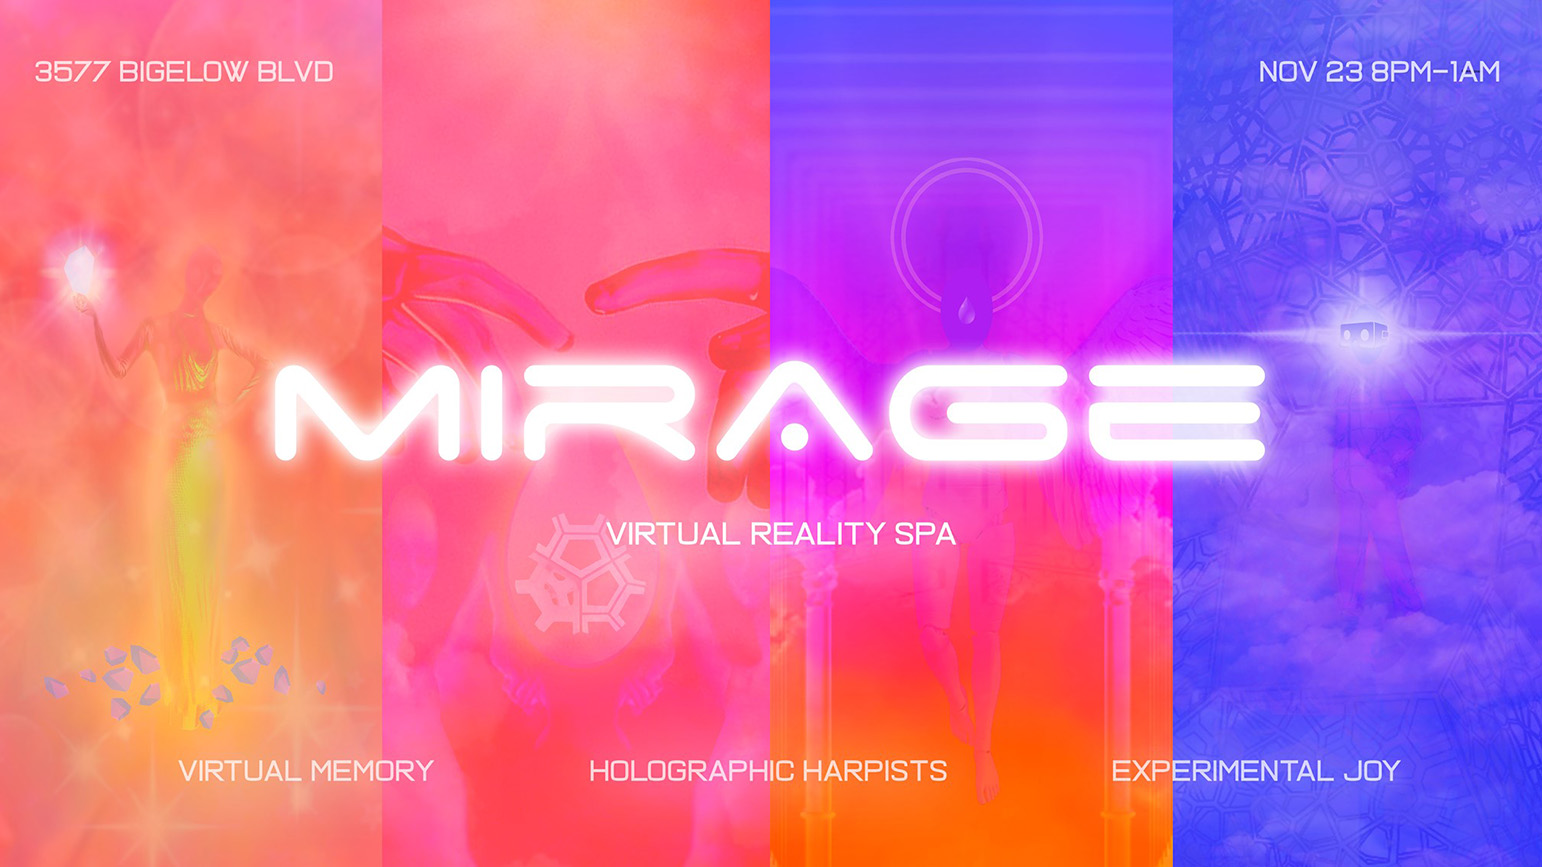 Graphic with abstract geometric shapes and angles with the word "Mirage" in the center